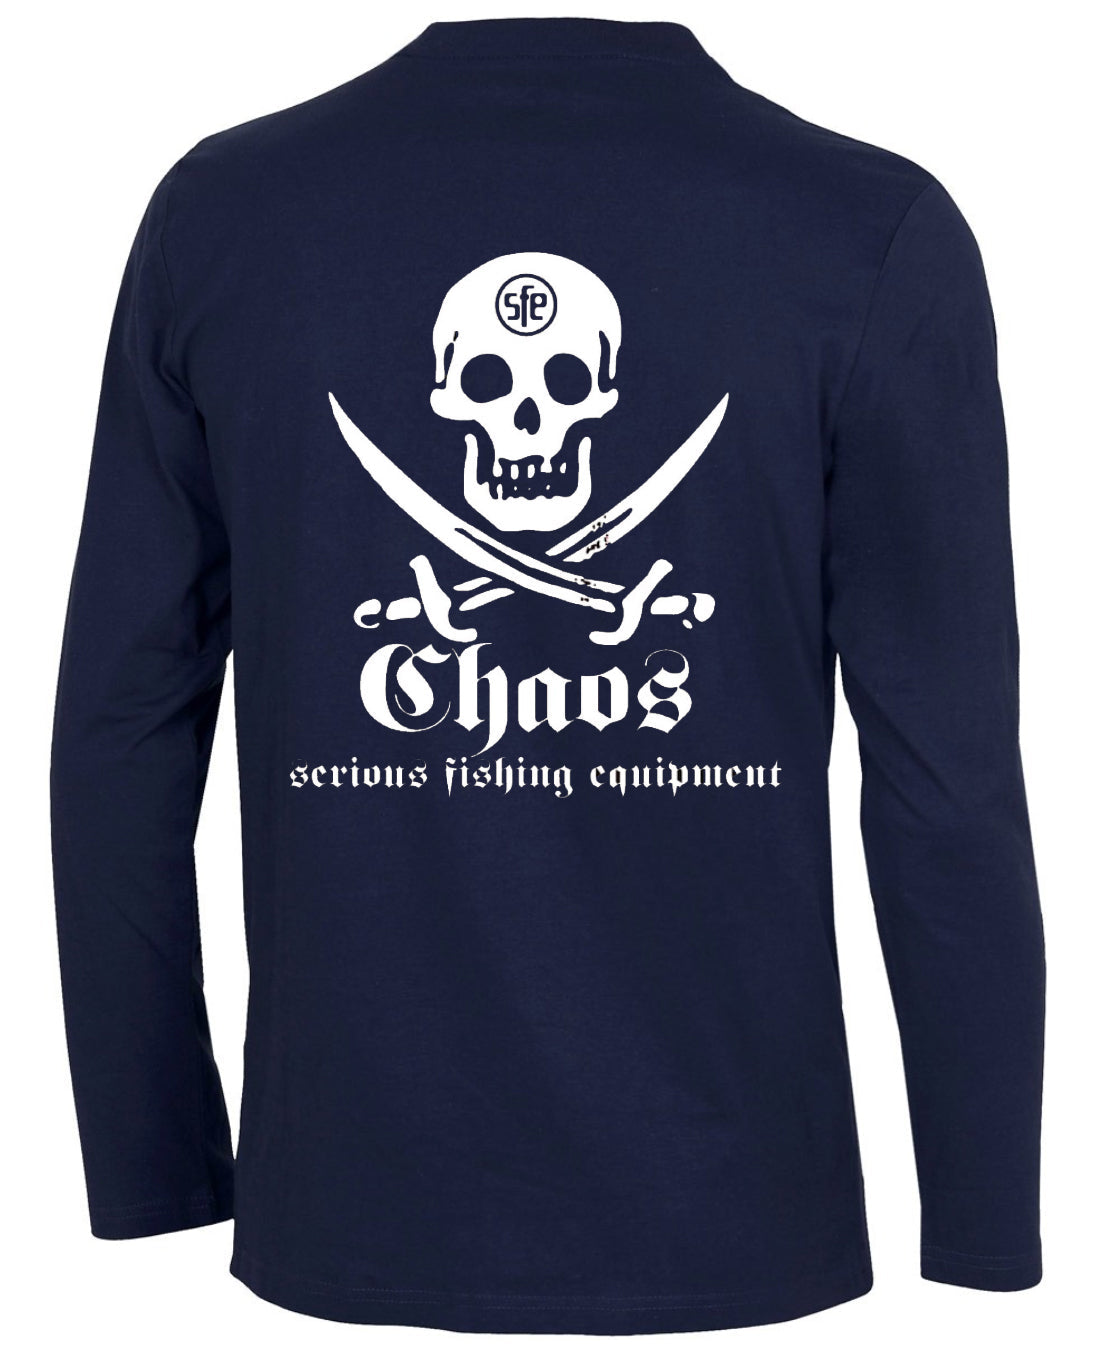 Youth Long Sleeve Pirate T-Shirt